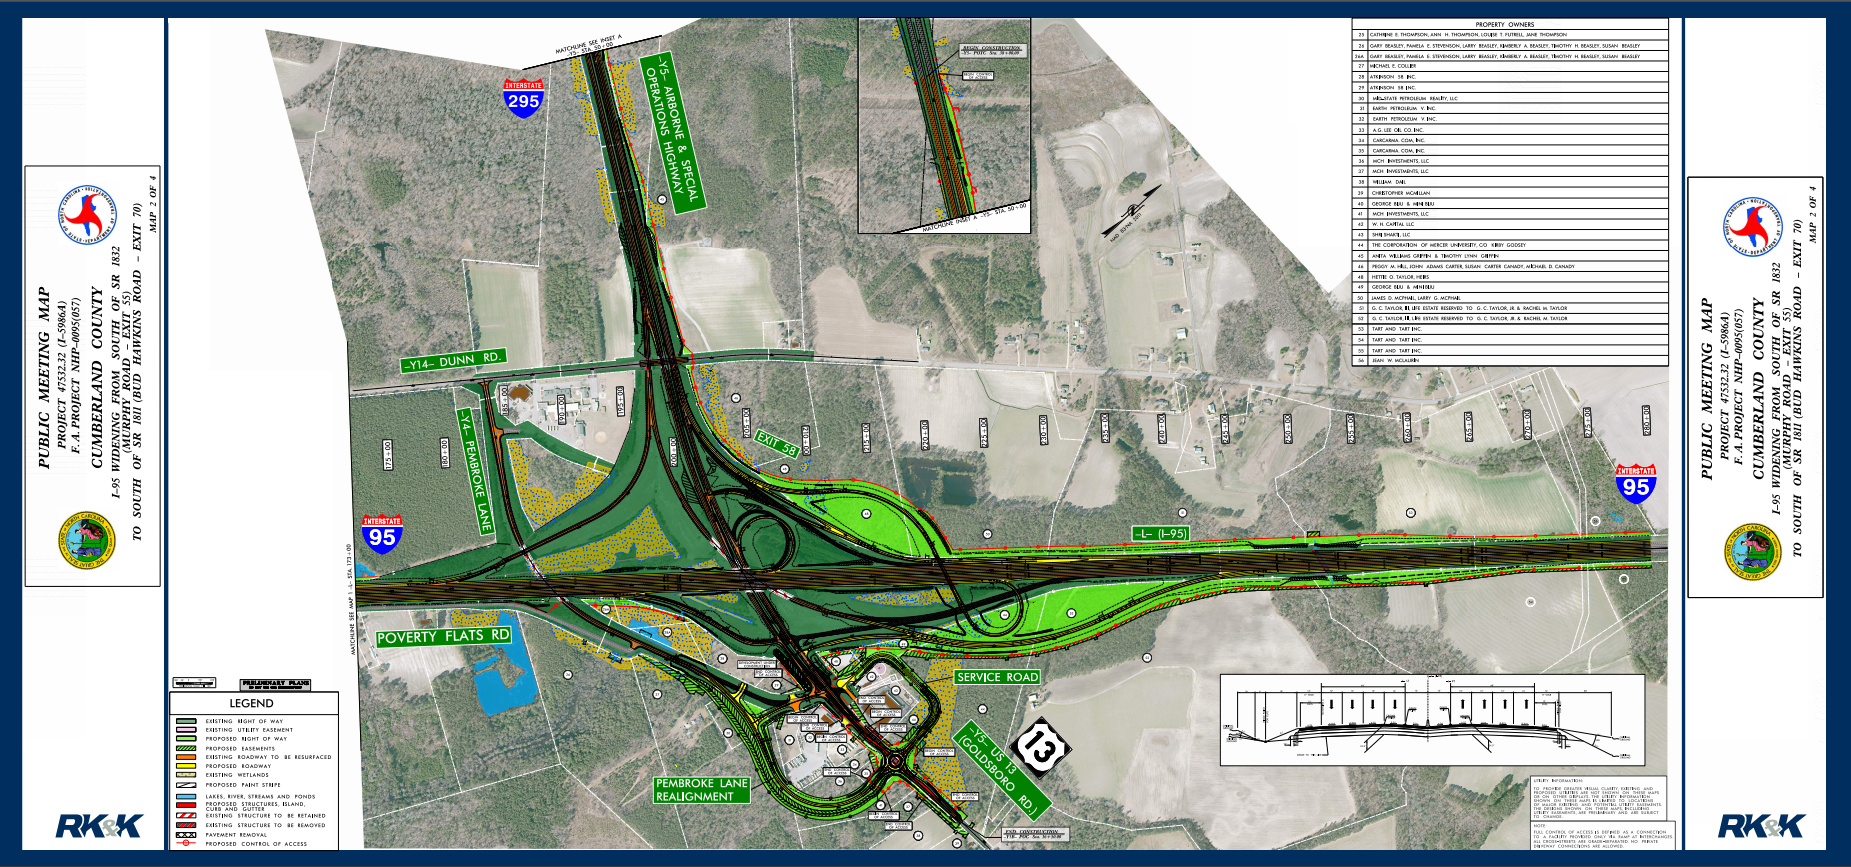 NCDOT plan for reconstructed interchange between I-95 and I-295 north of Fayetteville, May 2020